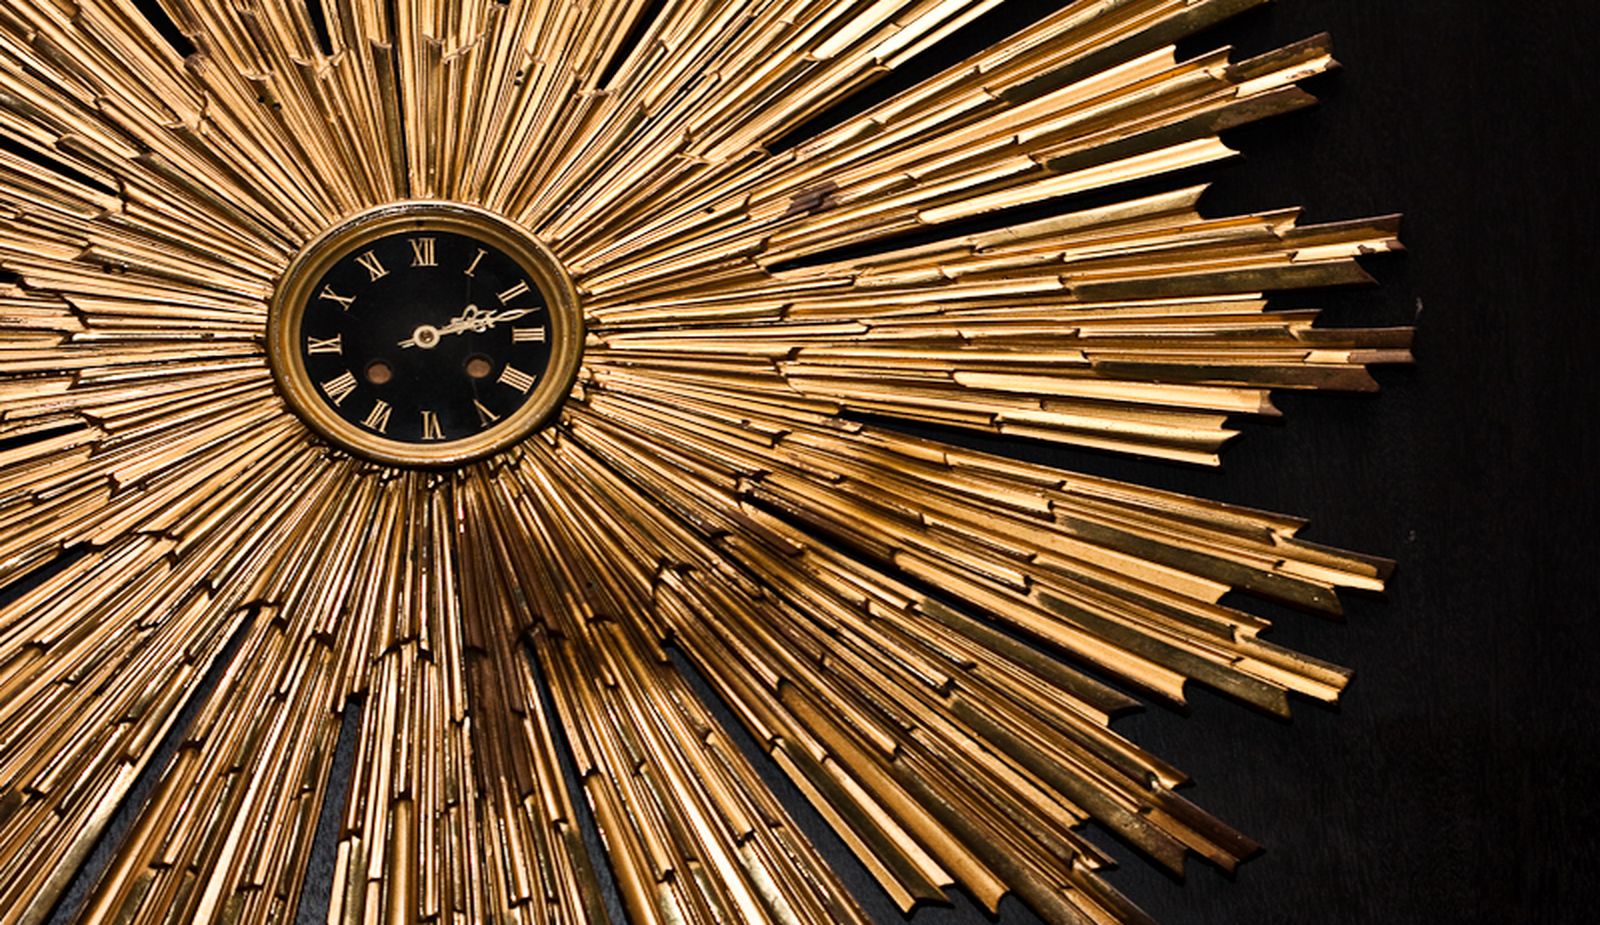 round gold clock that is featured in our hotel lobby.